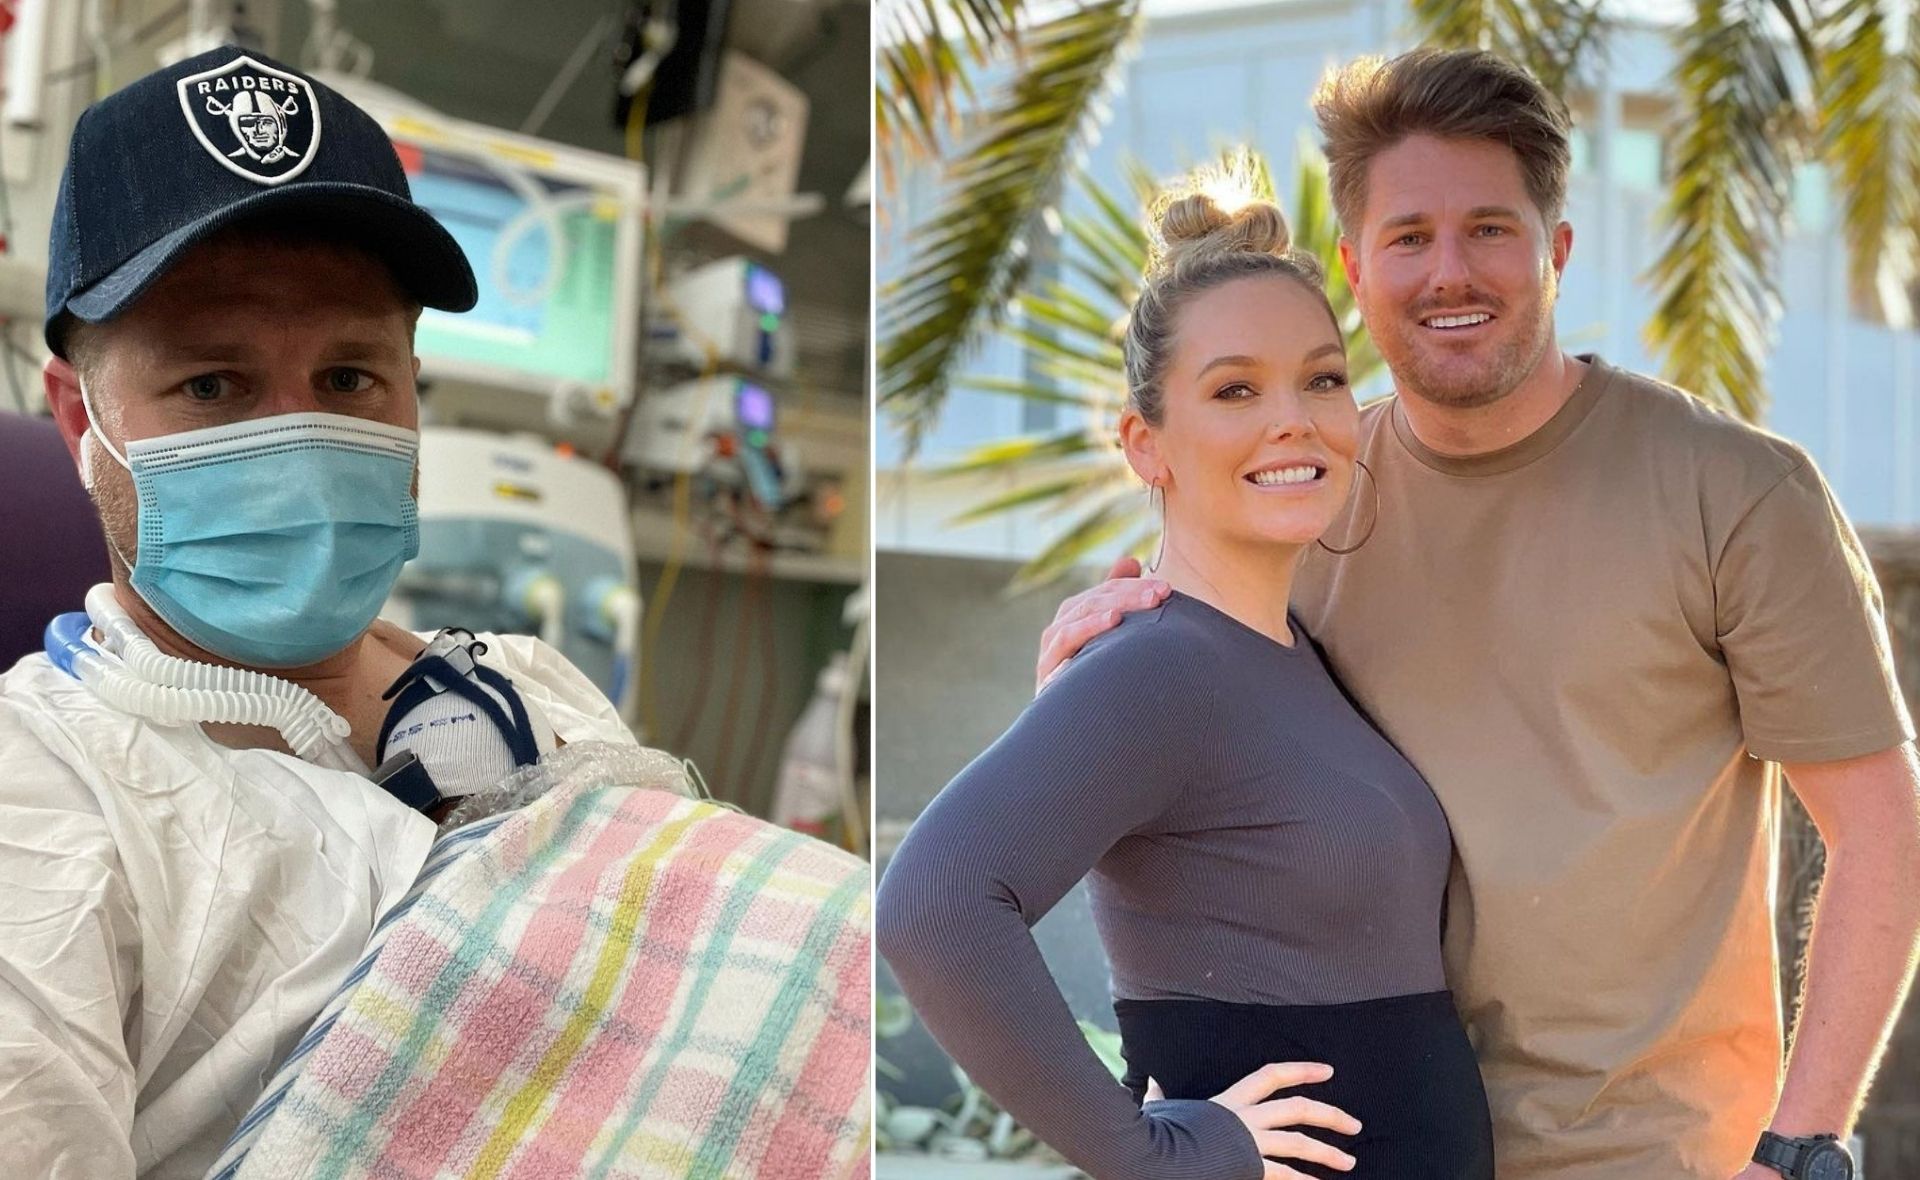 MAFS’ Bryce Ruthven and Melissa Rawson celebrate an important win for their twins in the hospital